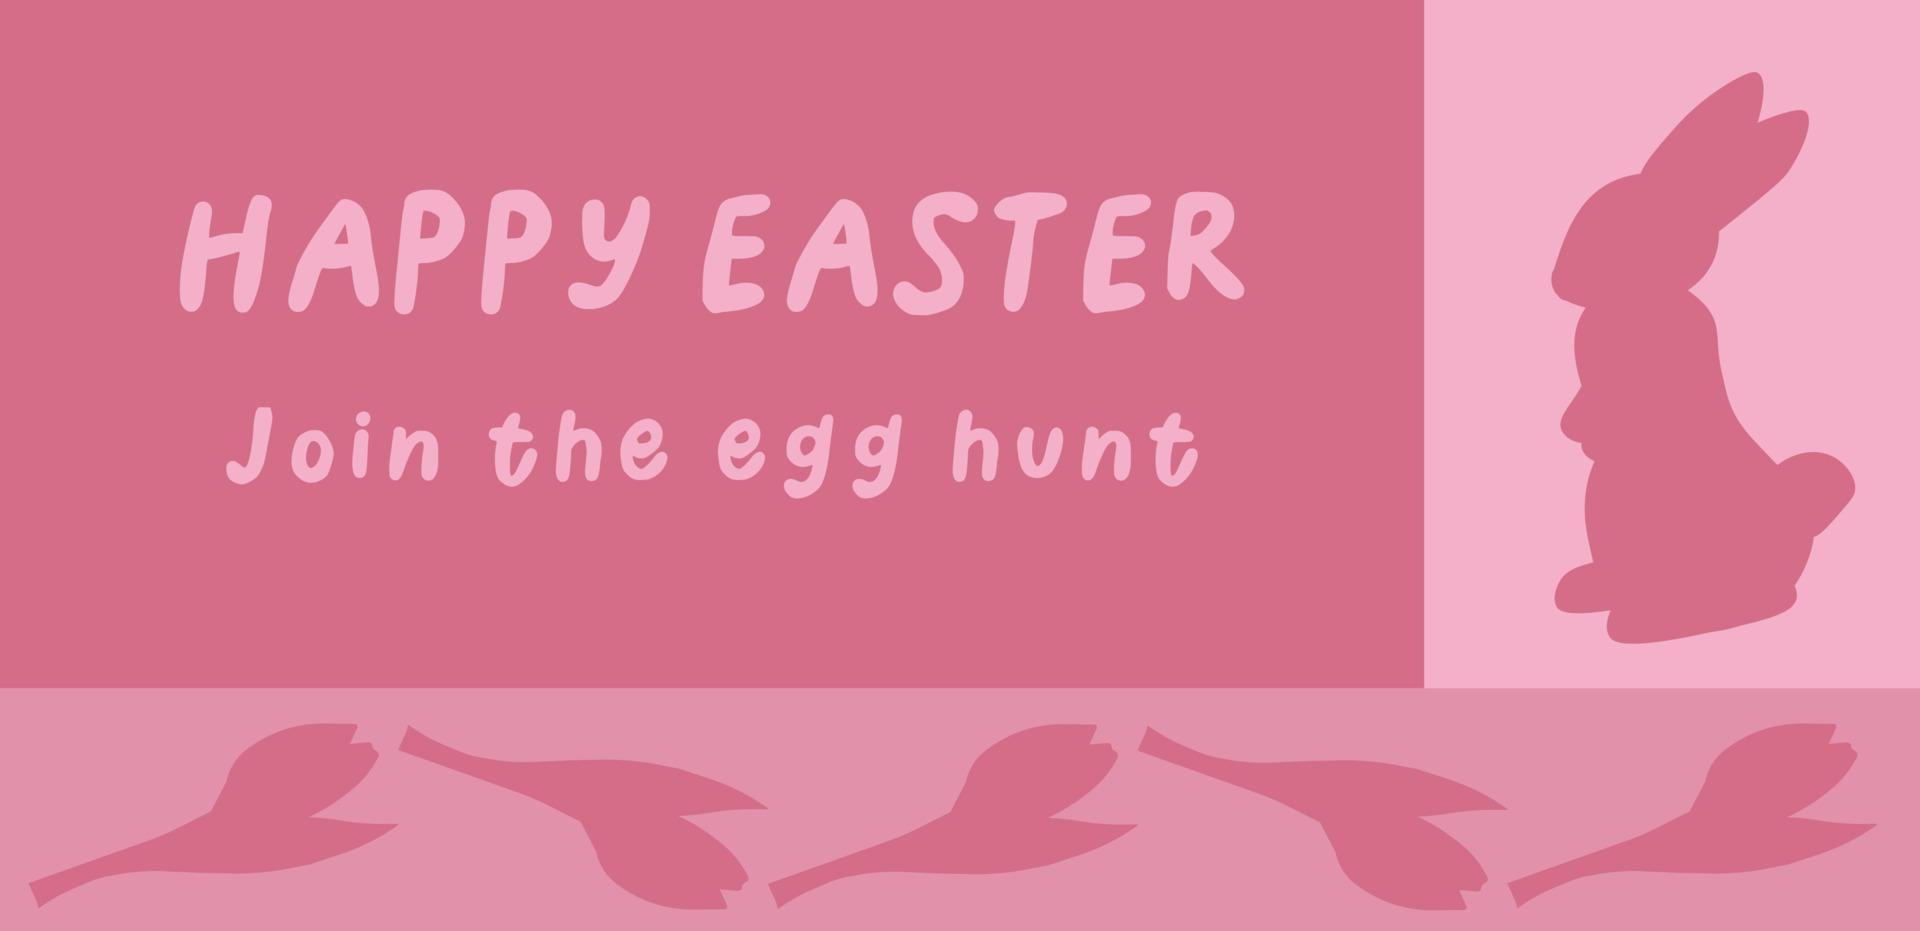 Happy Easter vector illustration with bunny on pink background. Minimalistic monochrome banner